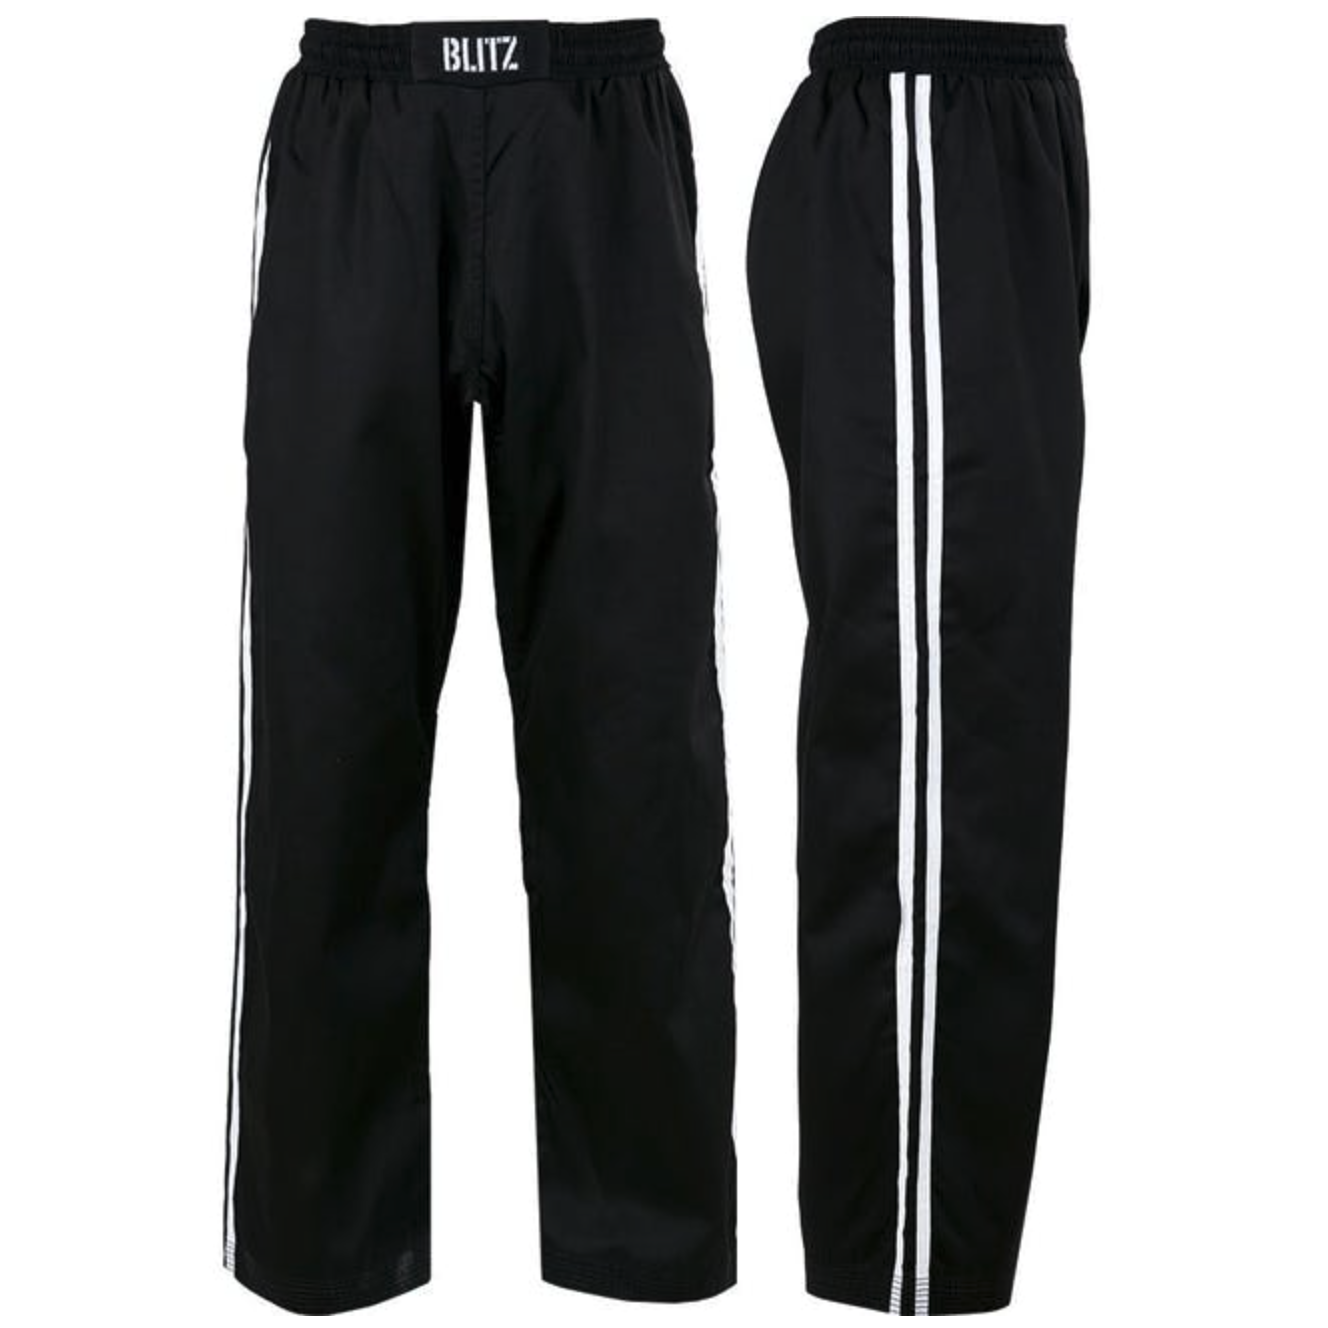 White Karate Trousers are perfect for Martial Arts Training  Enso Martial  Arts Shop Bristol